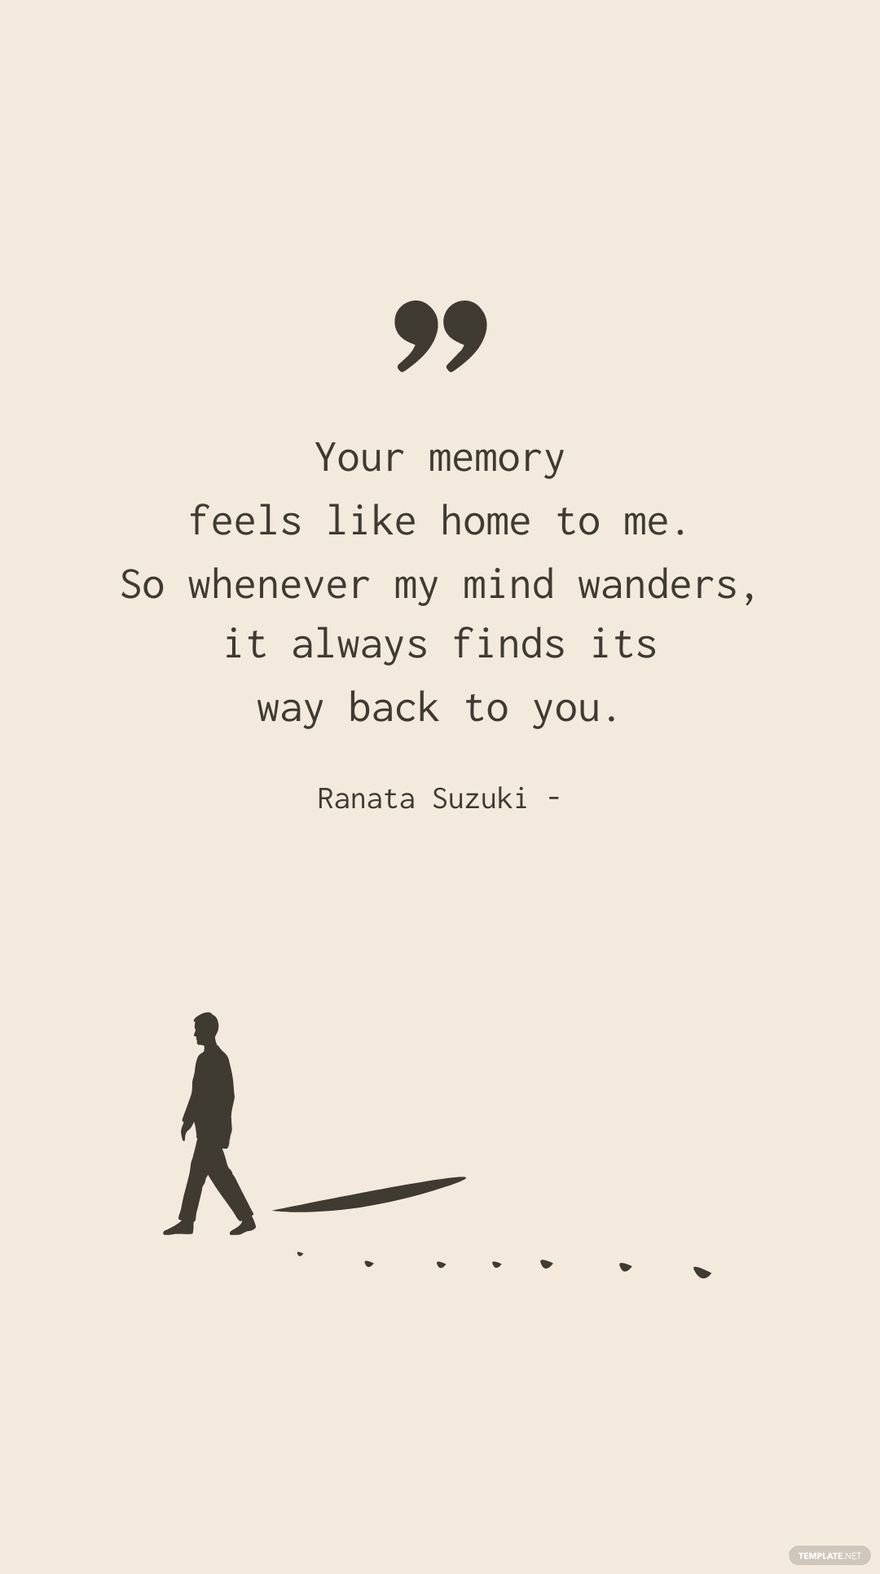 Ranata Suzuki - Your memory feels like home to me. So whenever my mind wanders, it always finds its way back to you.